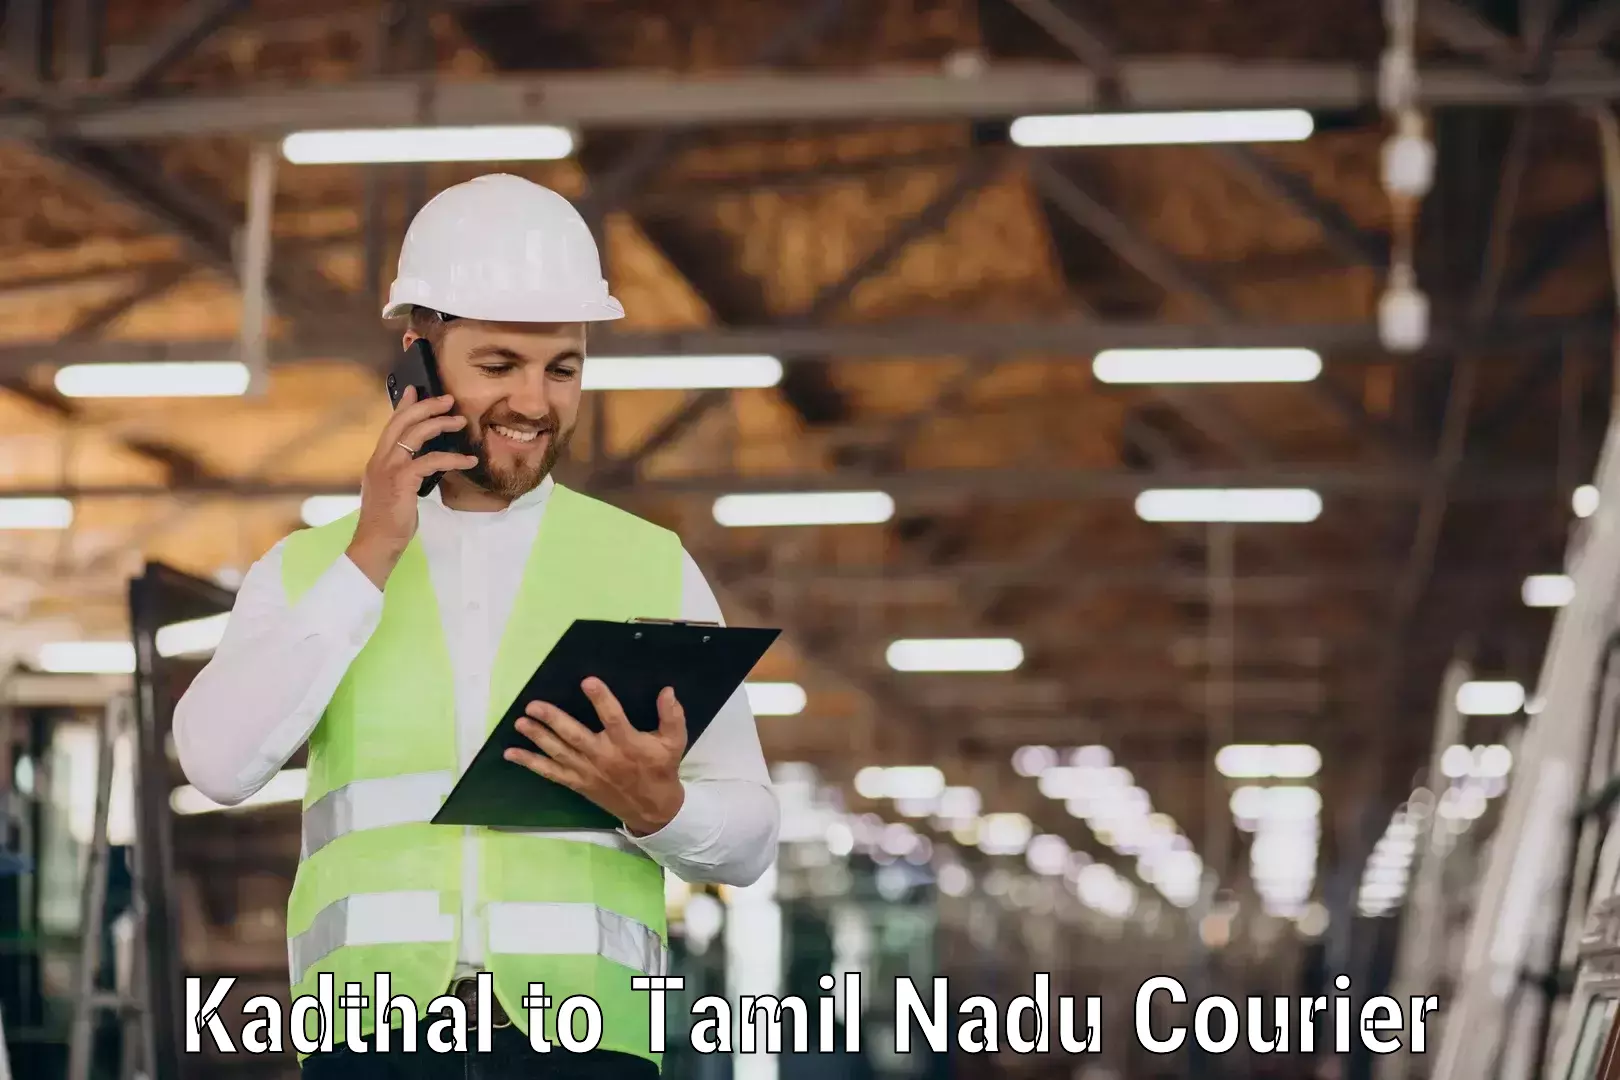 Global courier networks Kadthal to Tenkasi